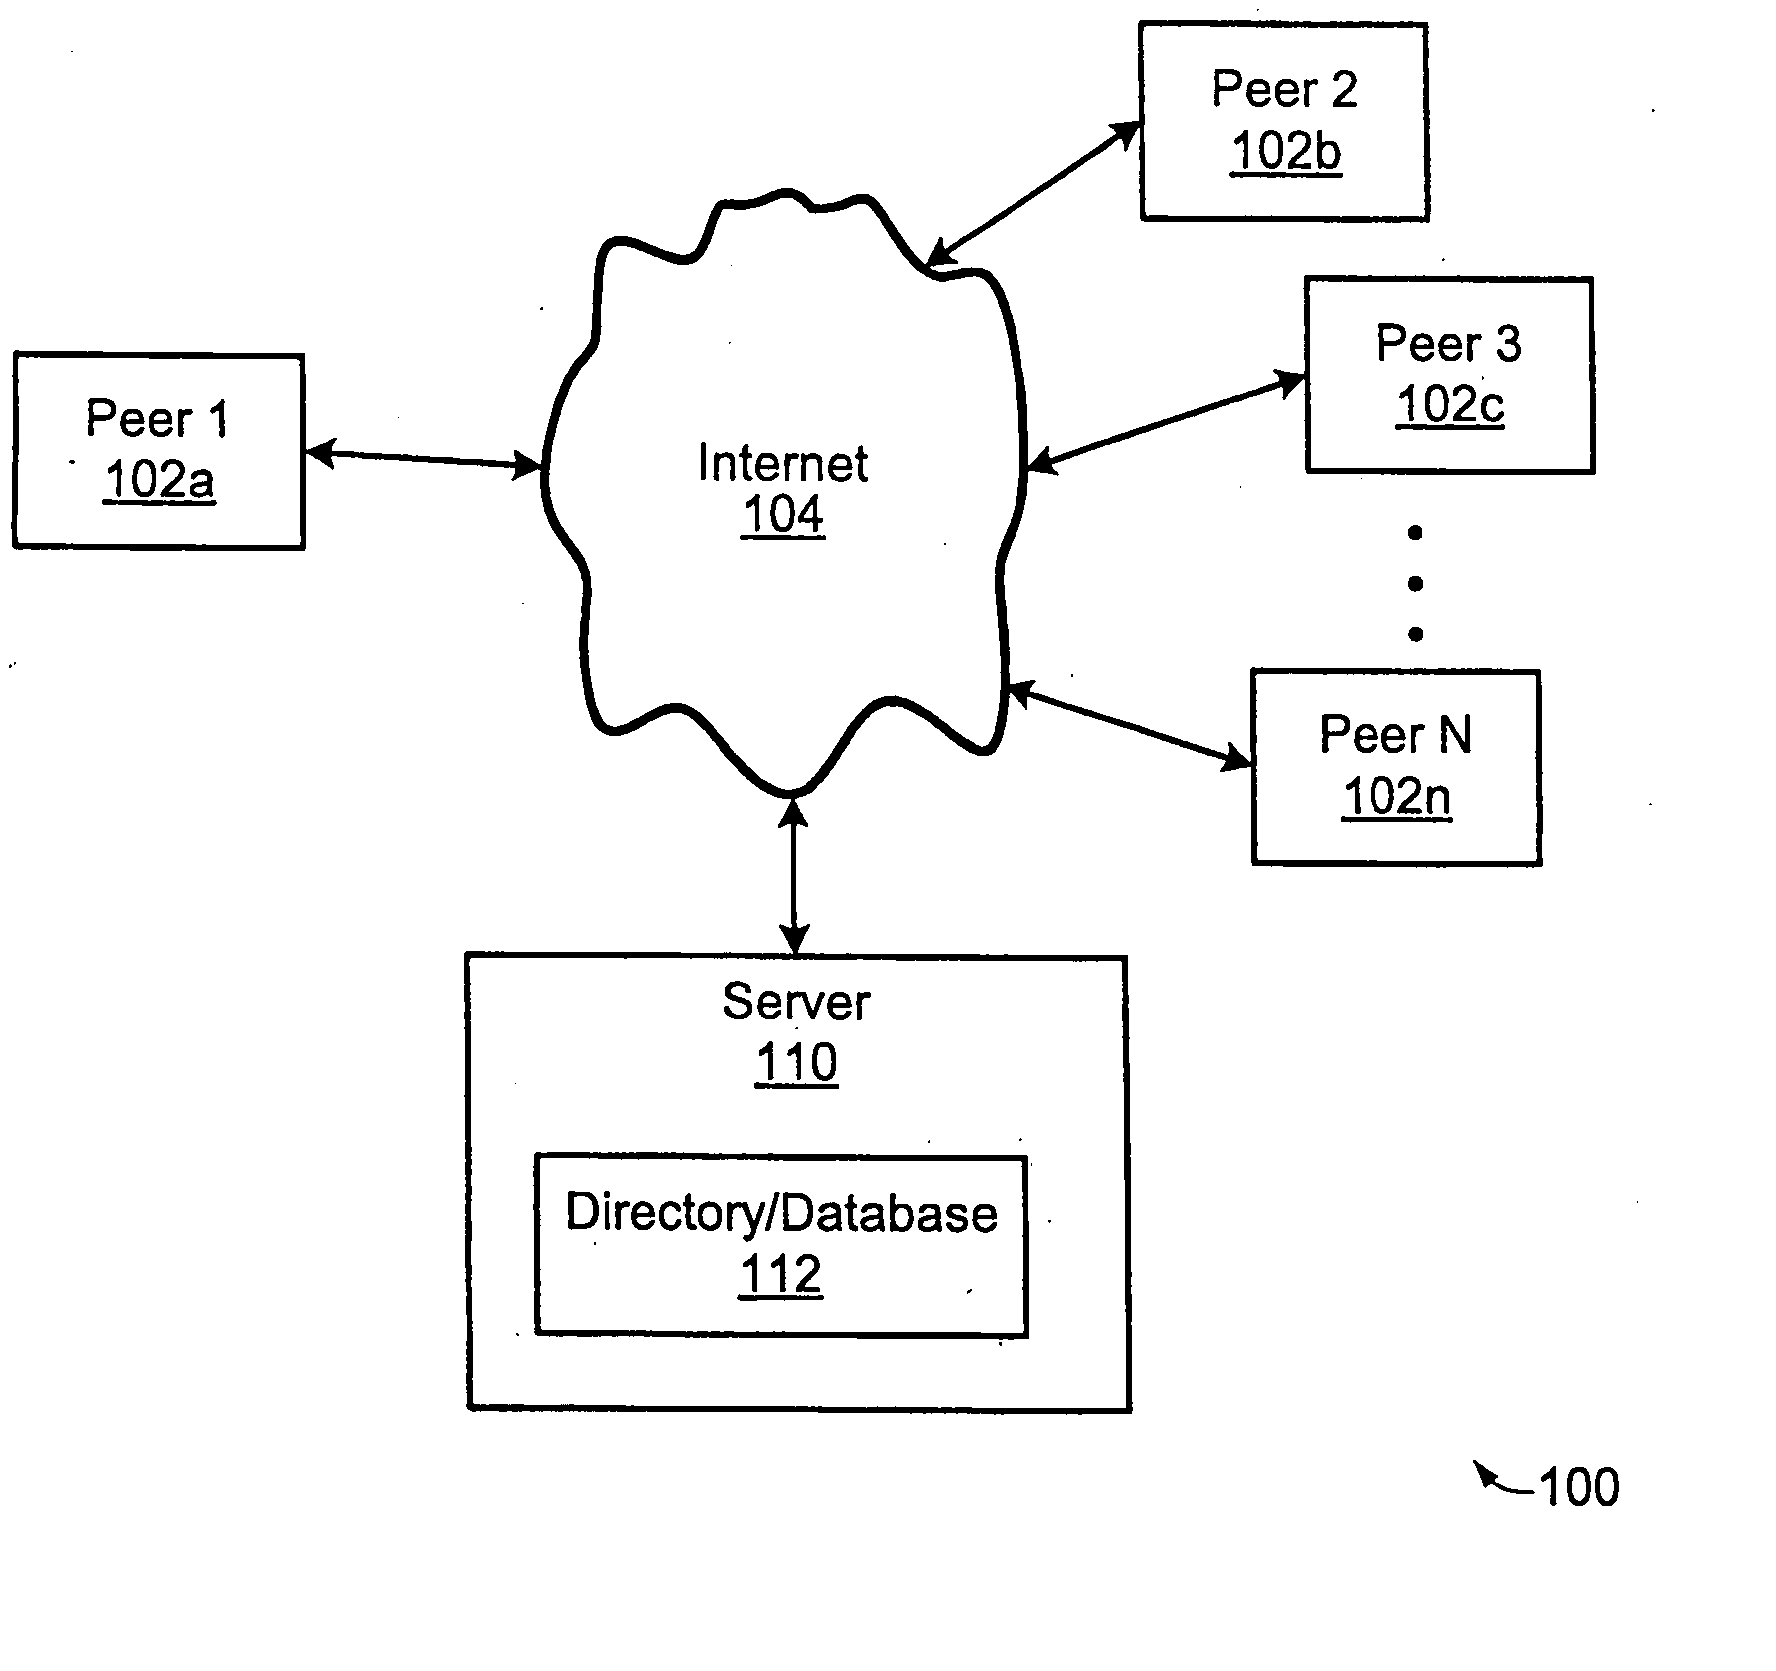 Hashing algorithm used for multiple files having identical content and fingerprint in a peer-to-peer network